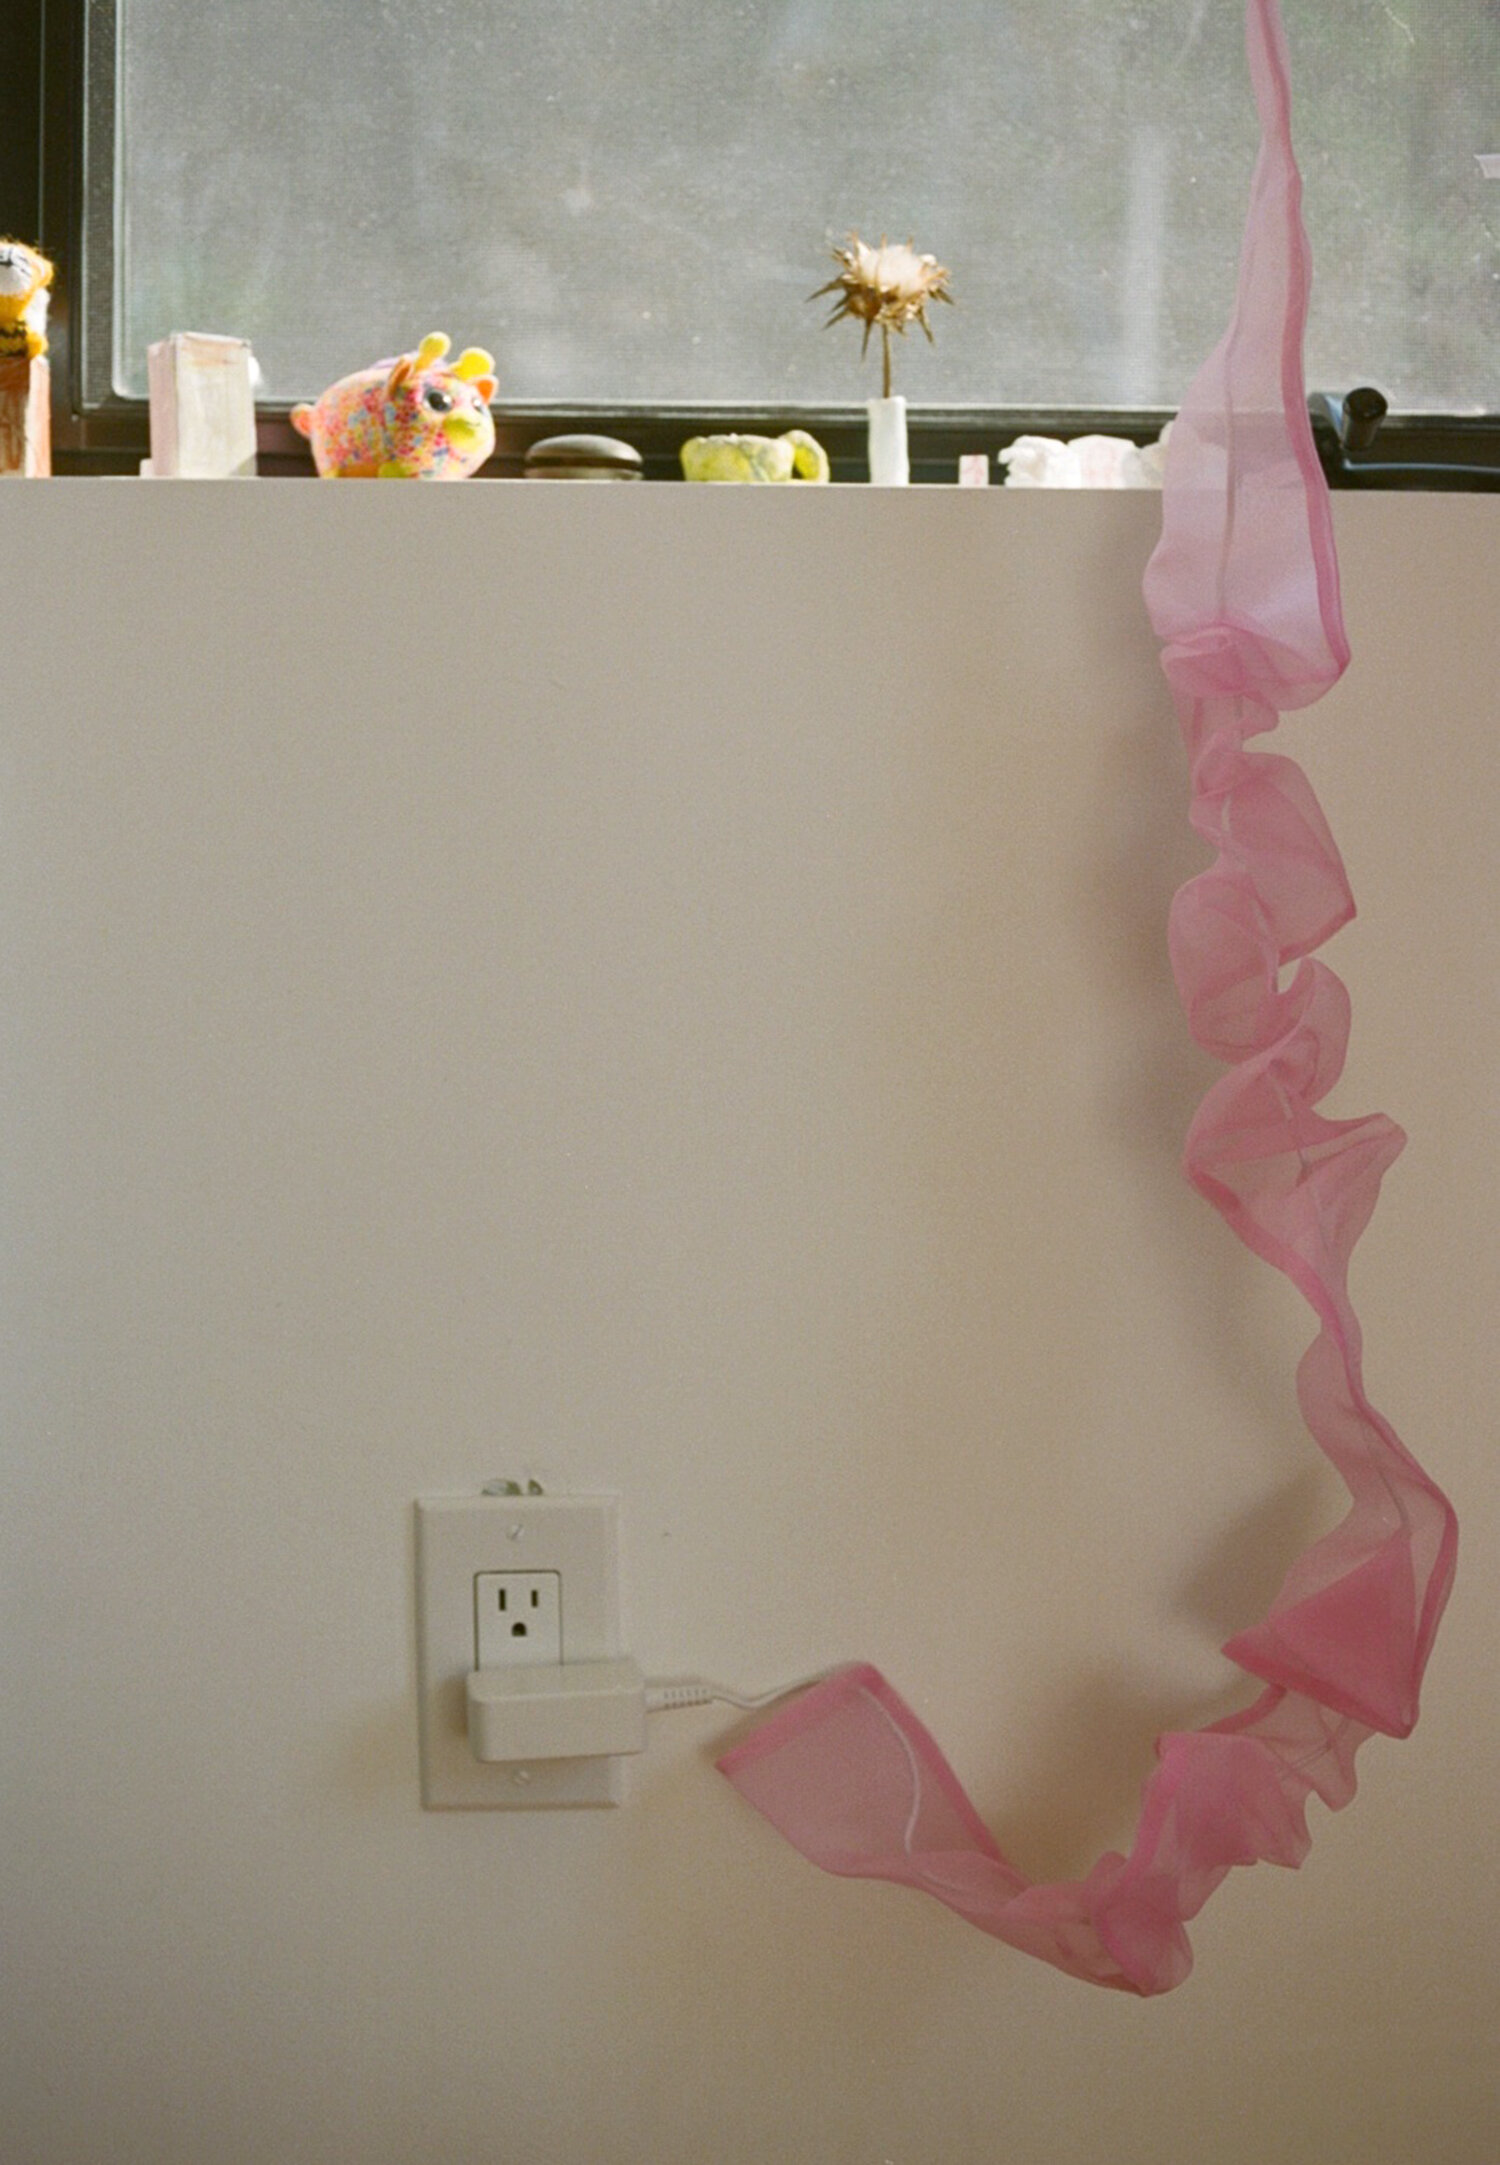 An electrical cord wrapped in a pink organza cord cover